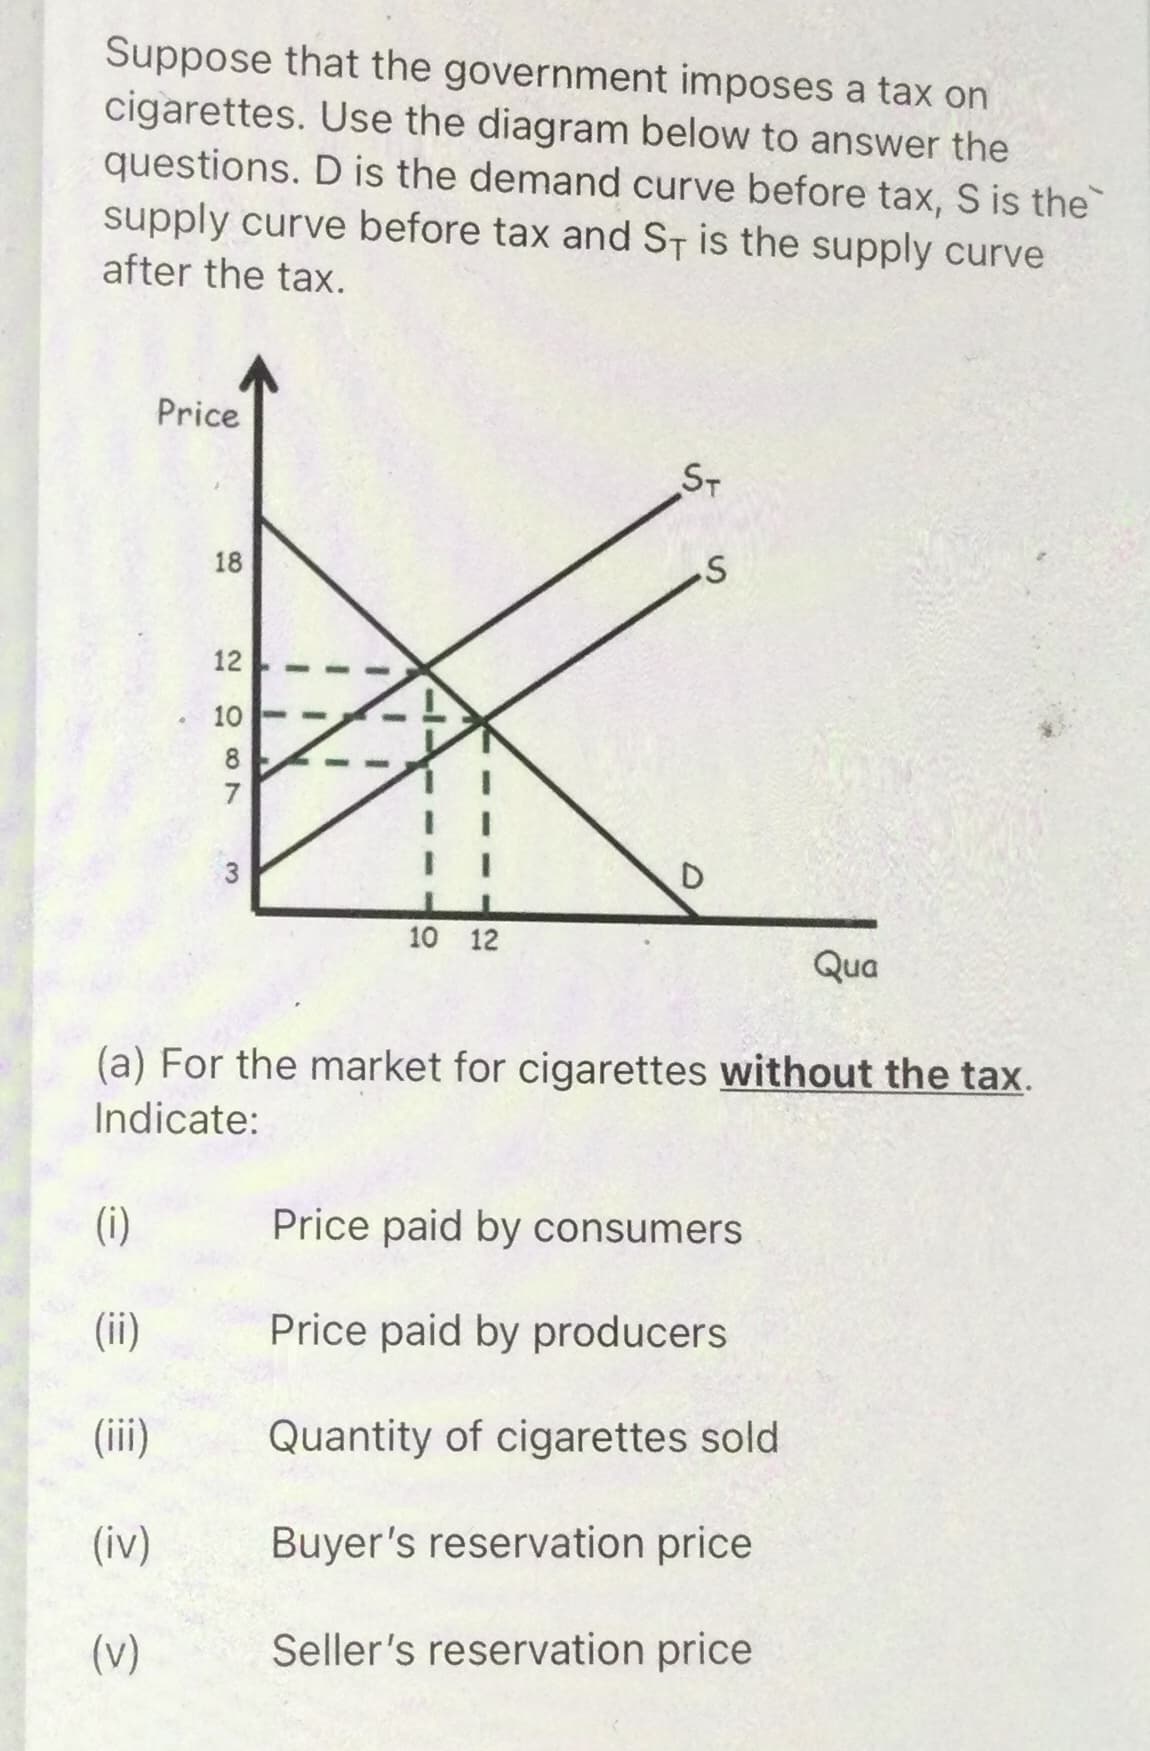 Suppose that the government imposes a tax on
cigarettes. Use the diagram below to answer the
questions. D is the demand curve before tax, S is the
supply curve before tax and ST is the supply curve
after the tax.
Price
ST
18
12
10
8
7.
D.
10 12
Qua
(a) For the market for cigarettes without the tax.
Indicate:
(i)
Price paid by consumers
(ii)
Price paid by producers
(iii)
Quantity of cigarettes sold
(iv)
Buyer's reservation price
(v)
Seller's reservation price
3,
